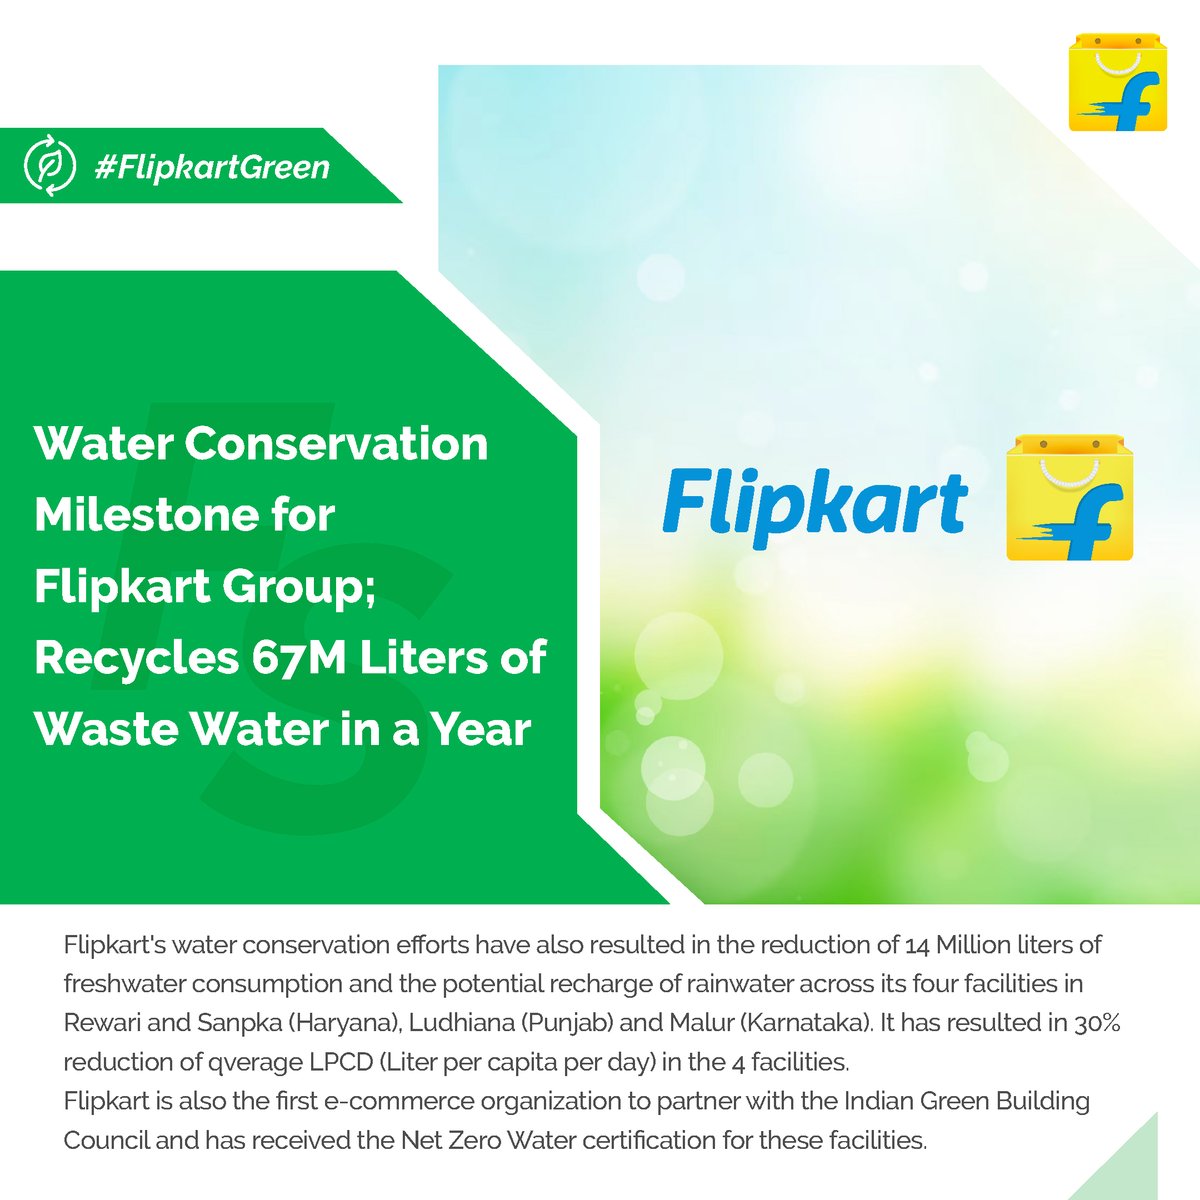 .@Flipkart Group recycled 67 million liters of waste water across four facilities, driving #waterconservation. Our focus on reducing, reusing, and recycling water aligns with our commitment to #sustainability and building a greener future. Read More: bit.ly/mar2124pr1…